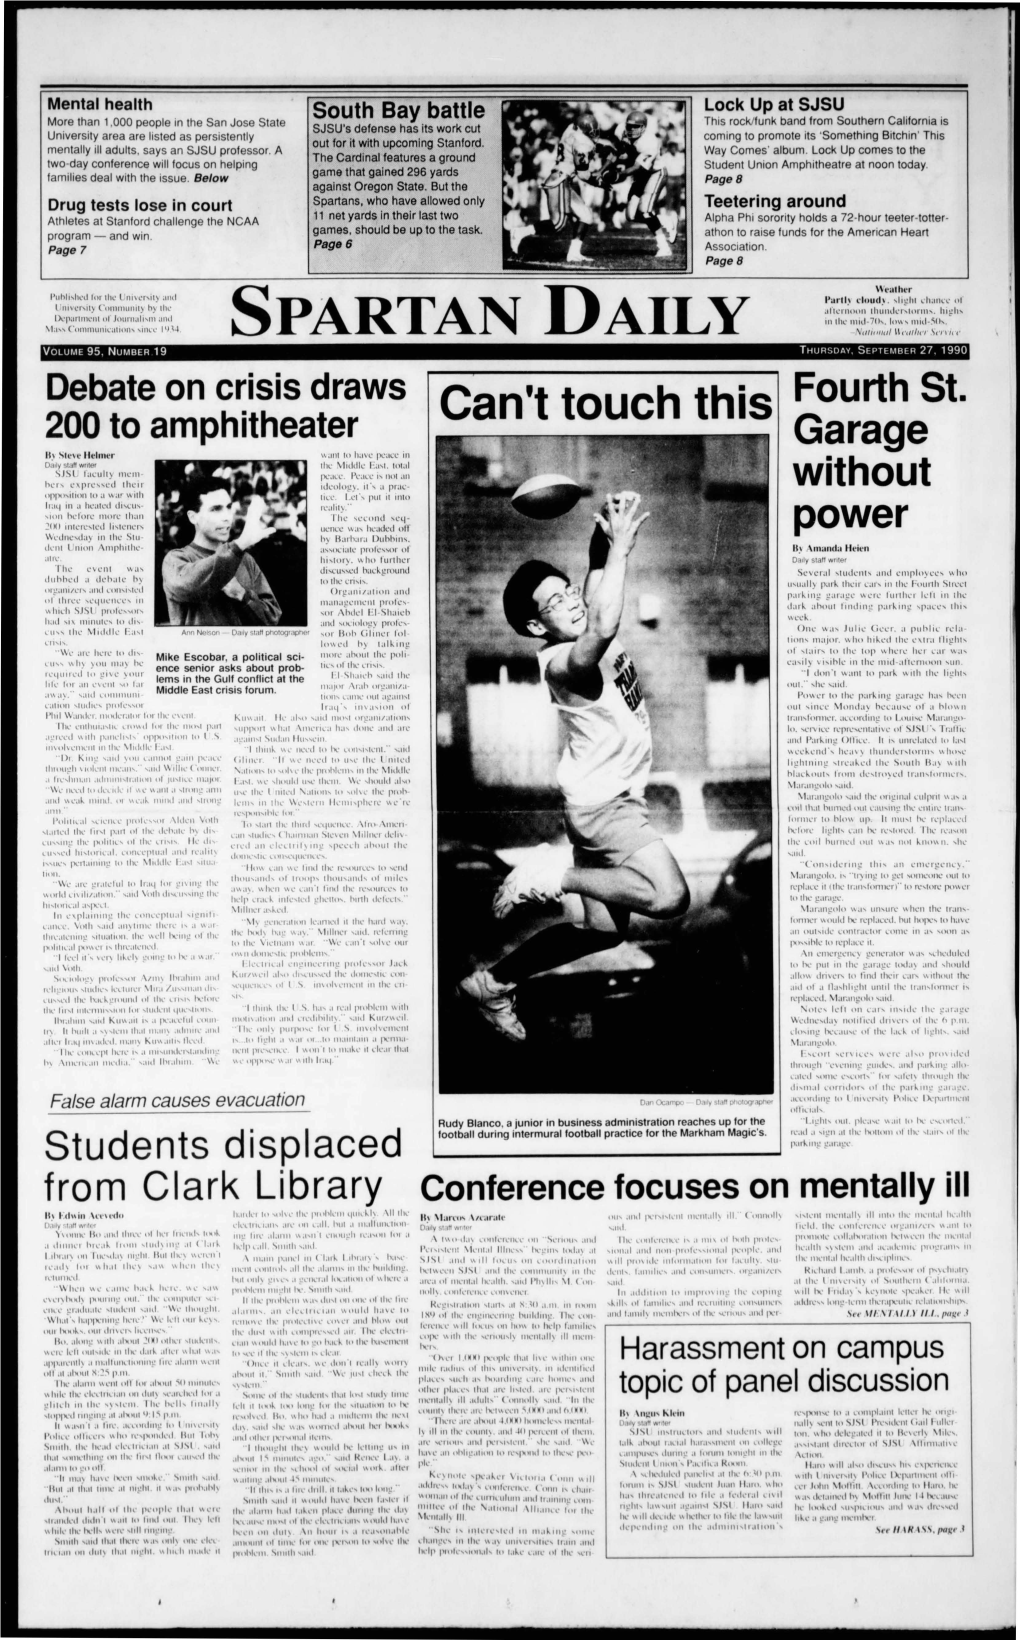 SPARTAN DAILY It, Iii , VOLUME 95, NUMBER 19 THURSDAY, SEPTEMBER 27, 1990 Debate on Crisis Draws Can't Touch This Fourth St